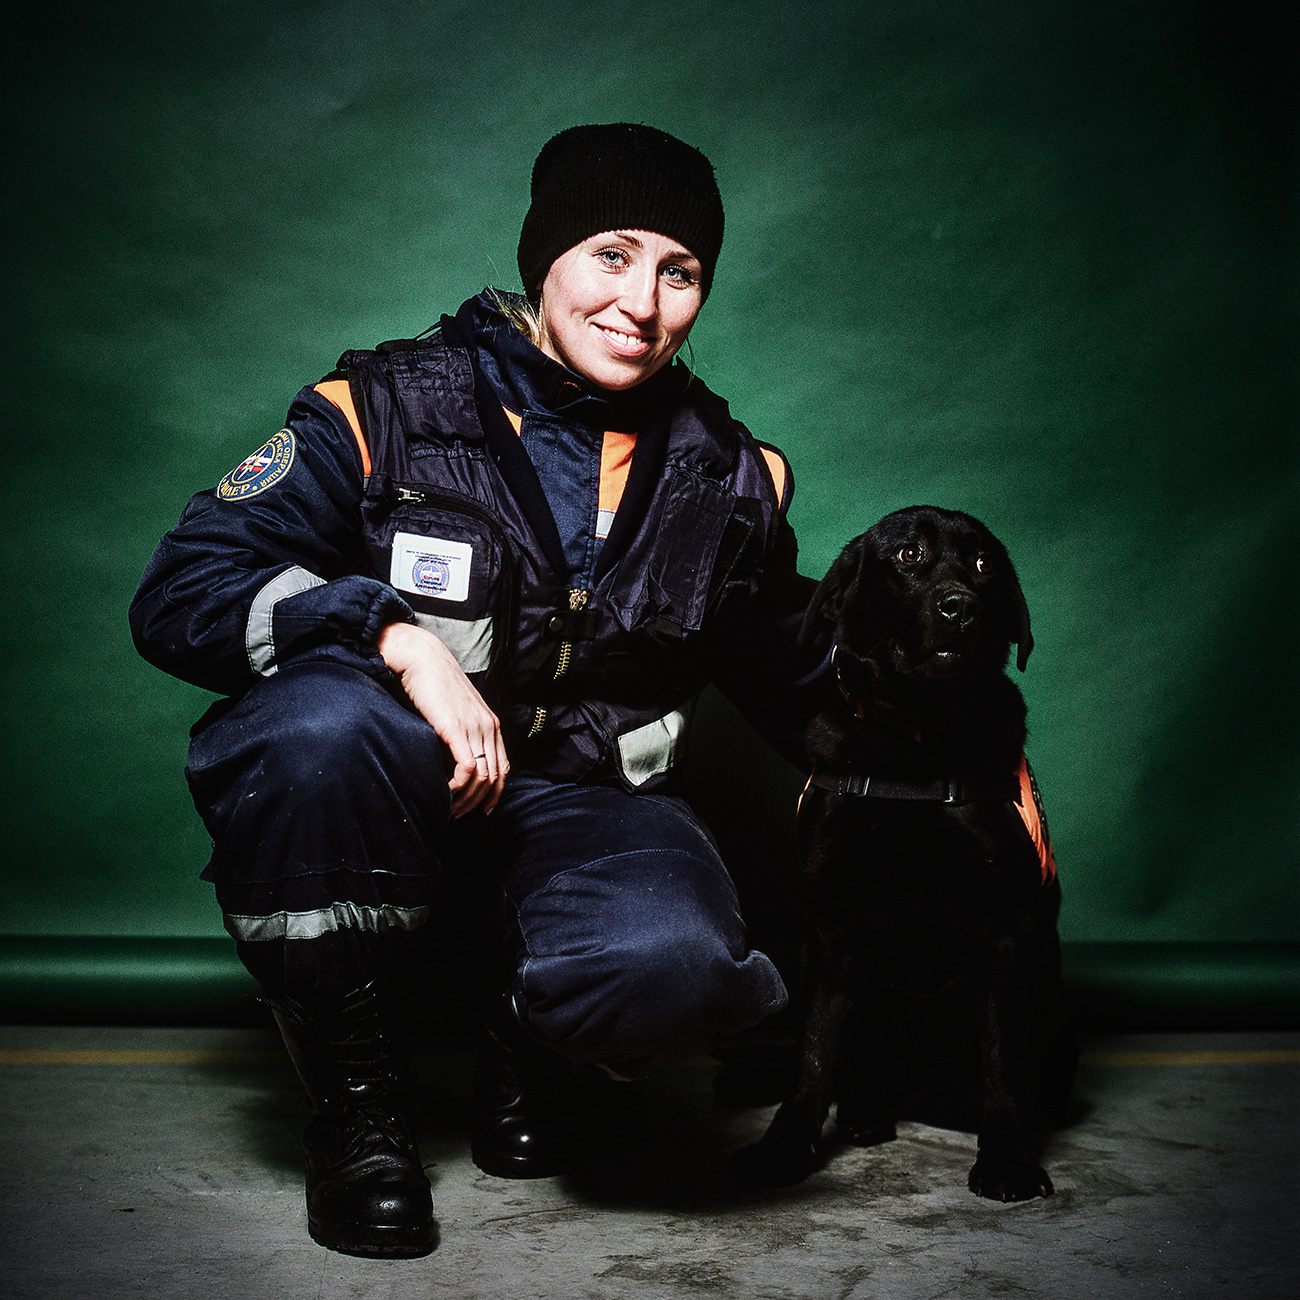 All her life Svetlana Sonina has loved dogs and dreamt of working with them. No wonder she chose the profession of cynologist. Her best friend, a dog named Gadi (aka, Queen of the Night) has been trained to search for explosives.Cynologists and dogs enjoy not just working together, but having fun, too. Sometimes they take part in dog competitions and exhibitions.According to Svetlana, the most extreme event in her career was searching for people under debris in Nepal after a devastating earthquake in 2015. Some information was taken from a Russian-language publication in Russky Reporter.Read More:&nbsp;  Lake Baskunchak: Where most of Russia’s salt is extractedWhat strange things are Russians doing with camels?How cotton led to the collapse of the Soviet UnionHow to meet a girl on the Moscow Metro?Glittering installations at a Moscow park will take your breath away